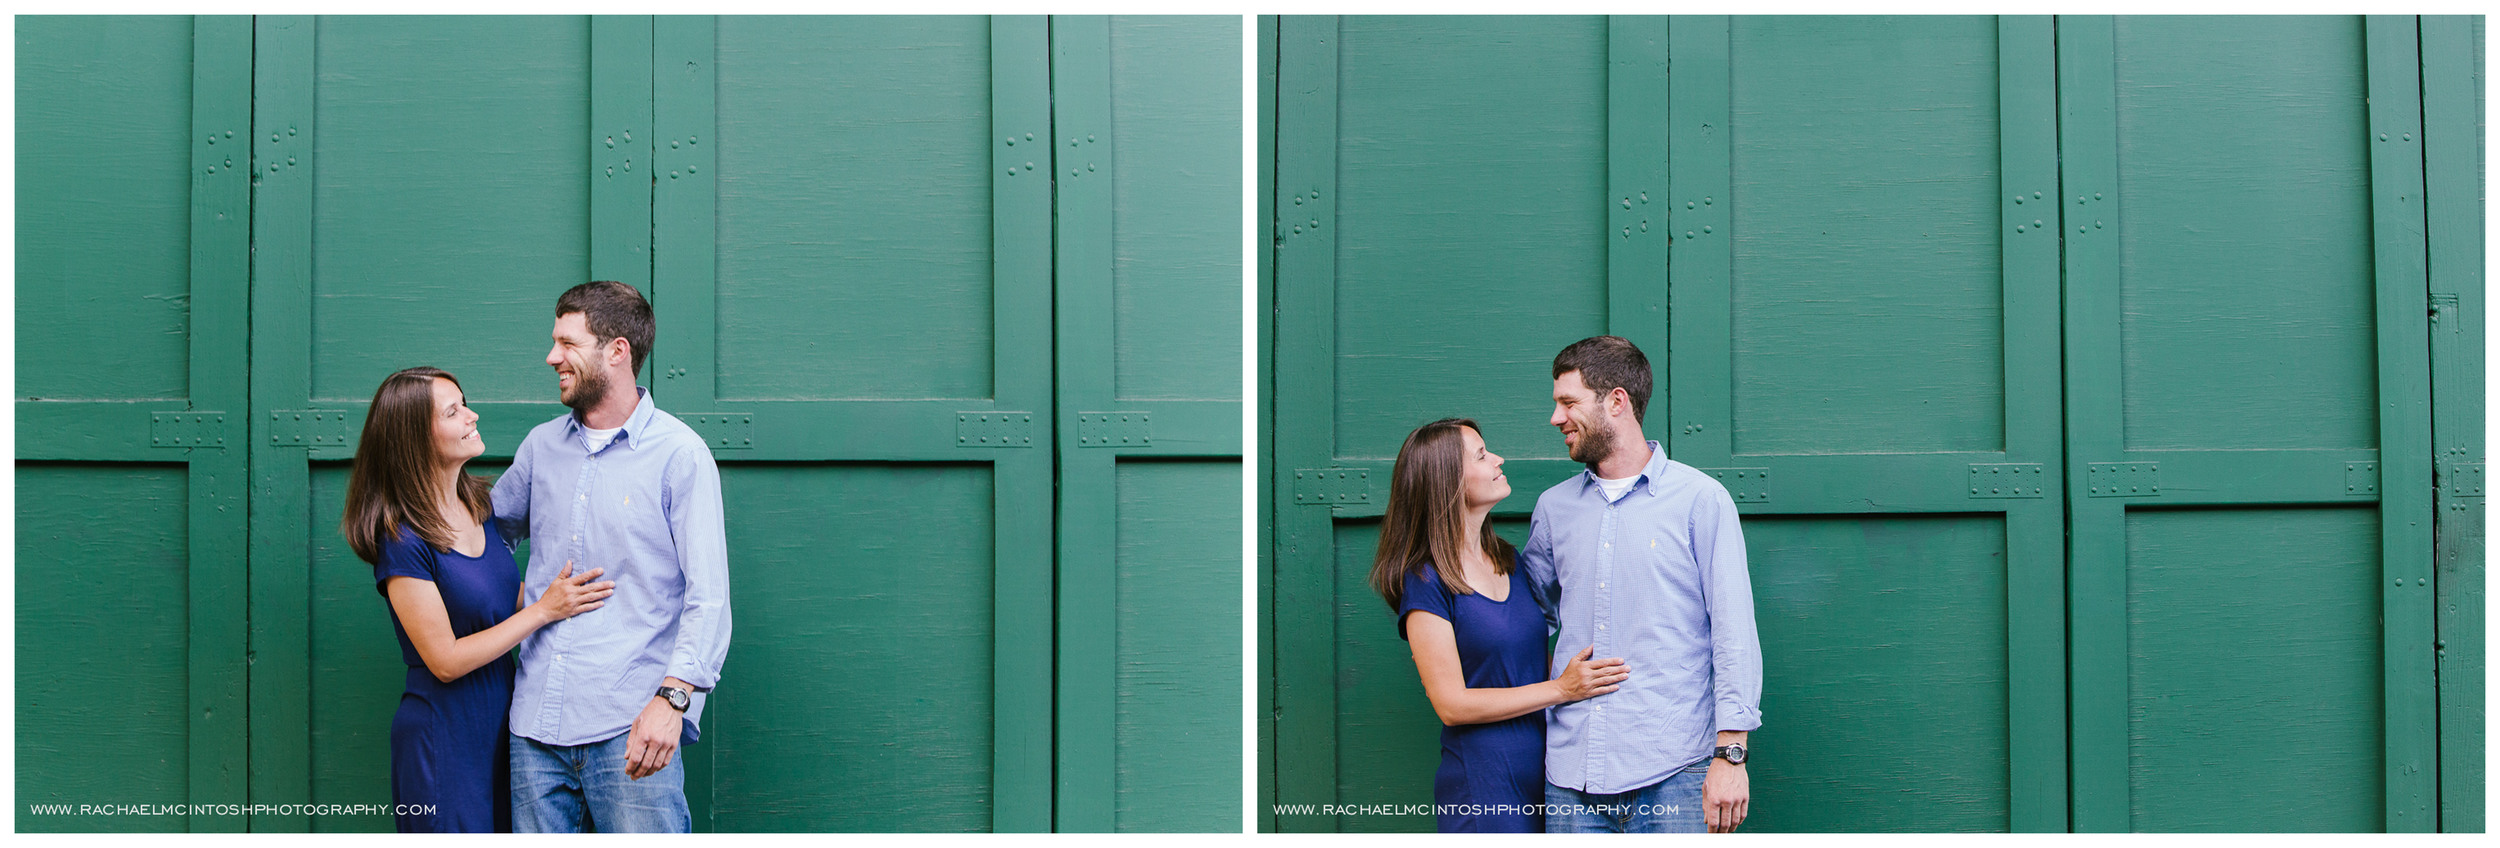 Down Town Asheville Engagement Session- Asheville Wedding Photography-24.jpg